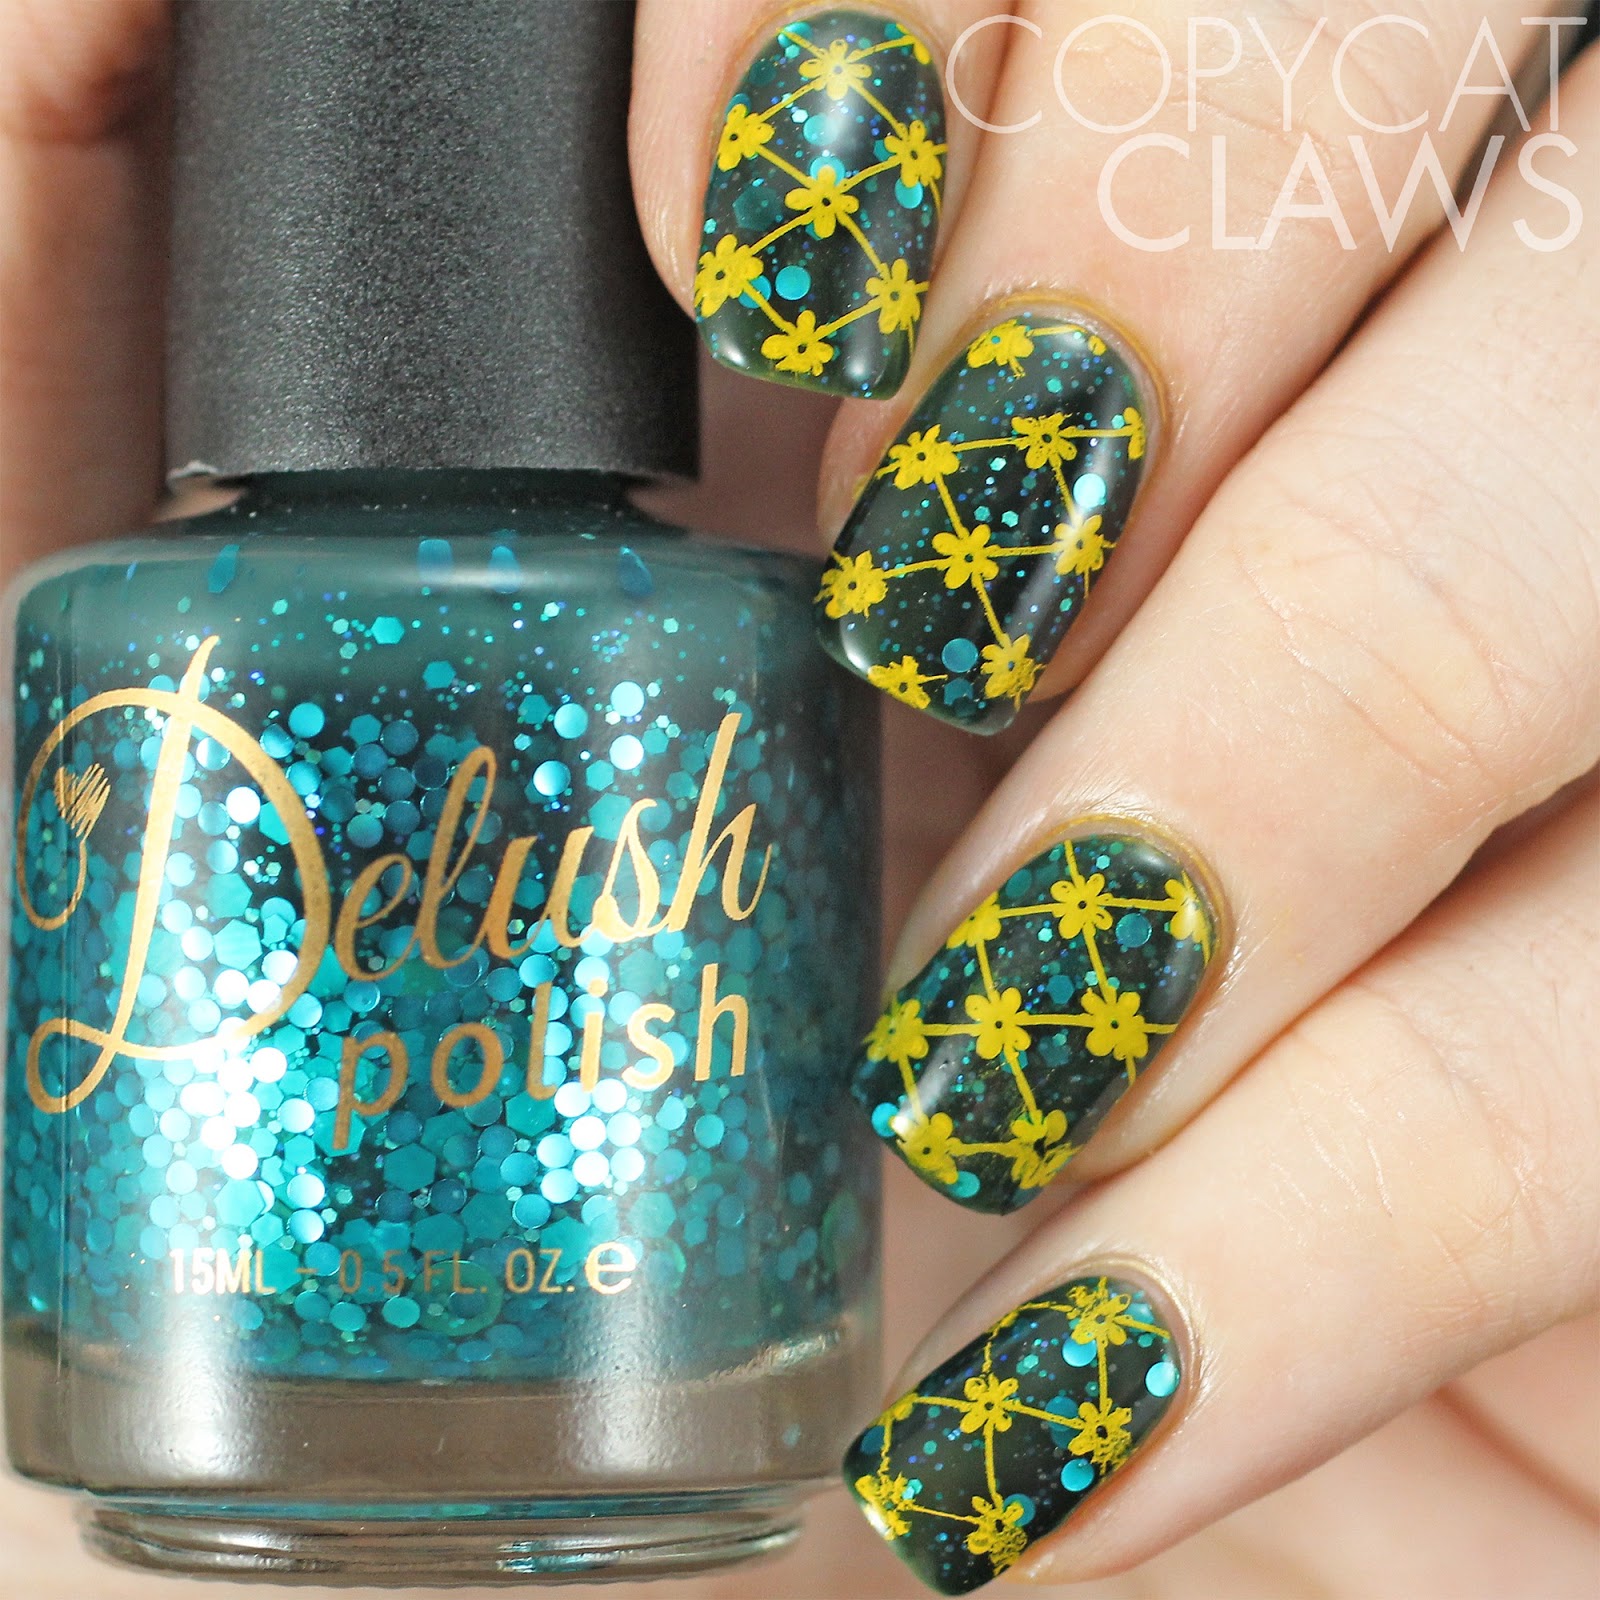 Copycat Claws: Delush Polish DP01 Enchanted Stamping Plate Review